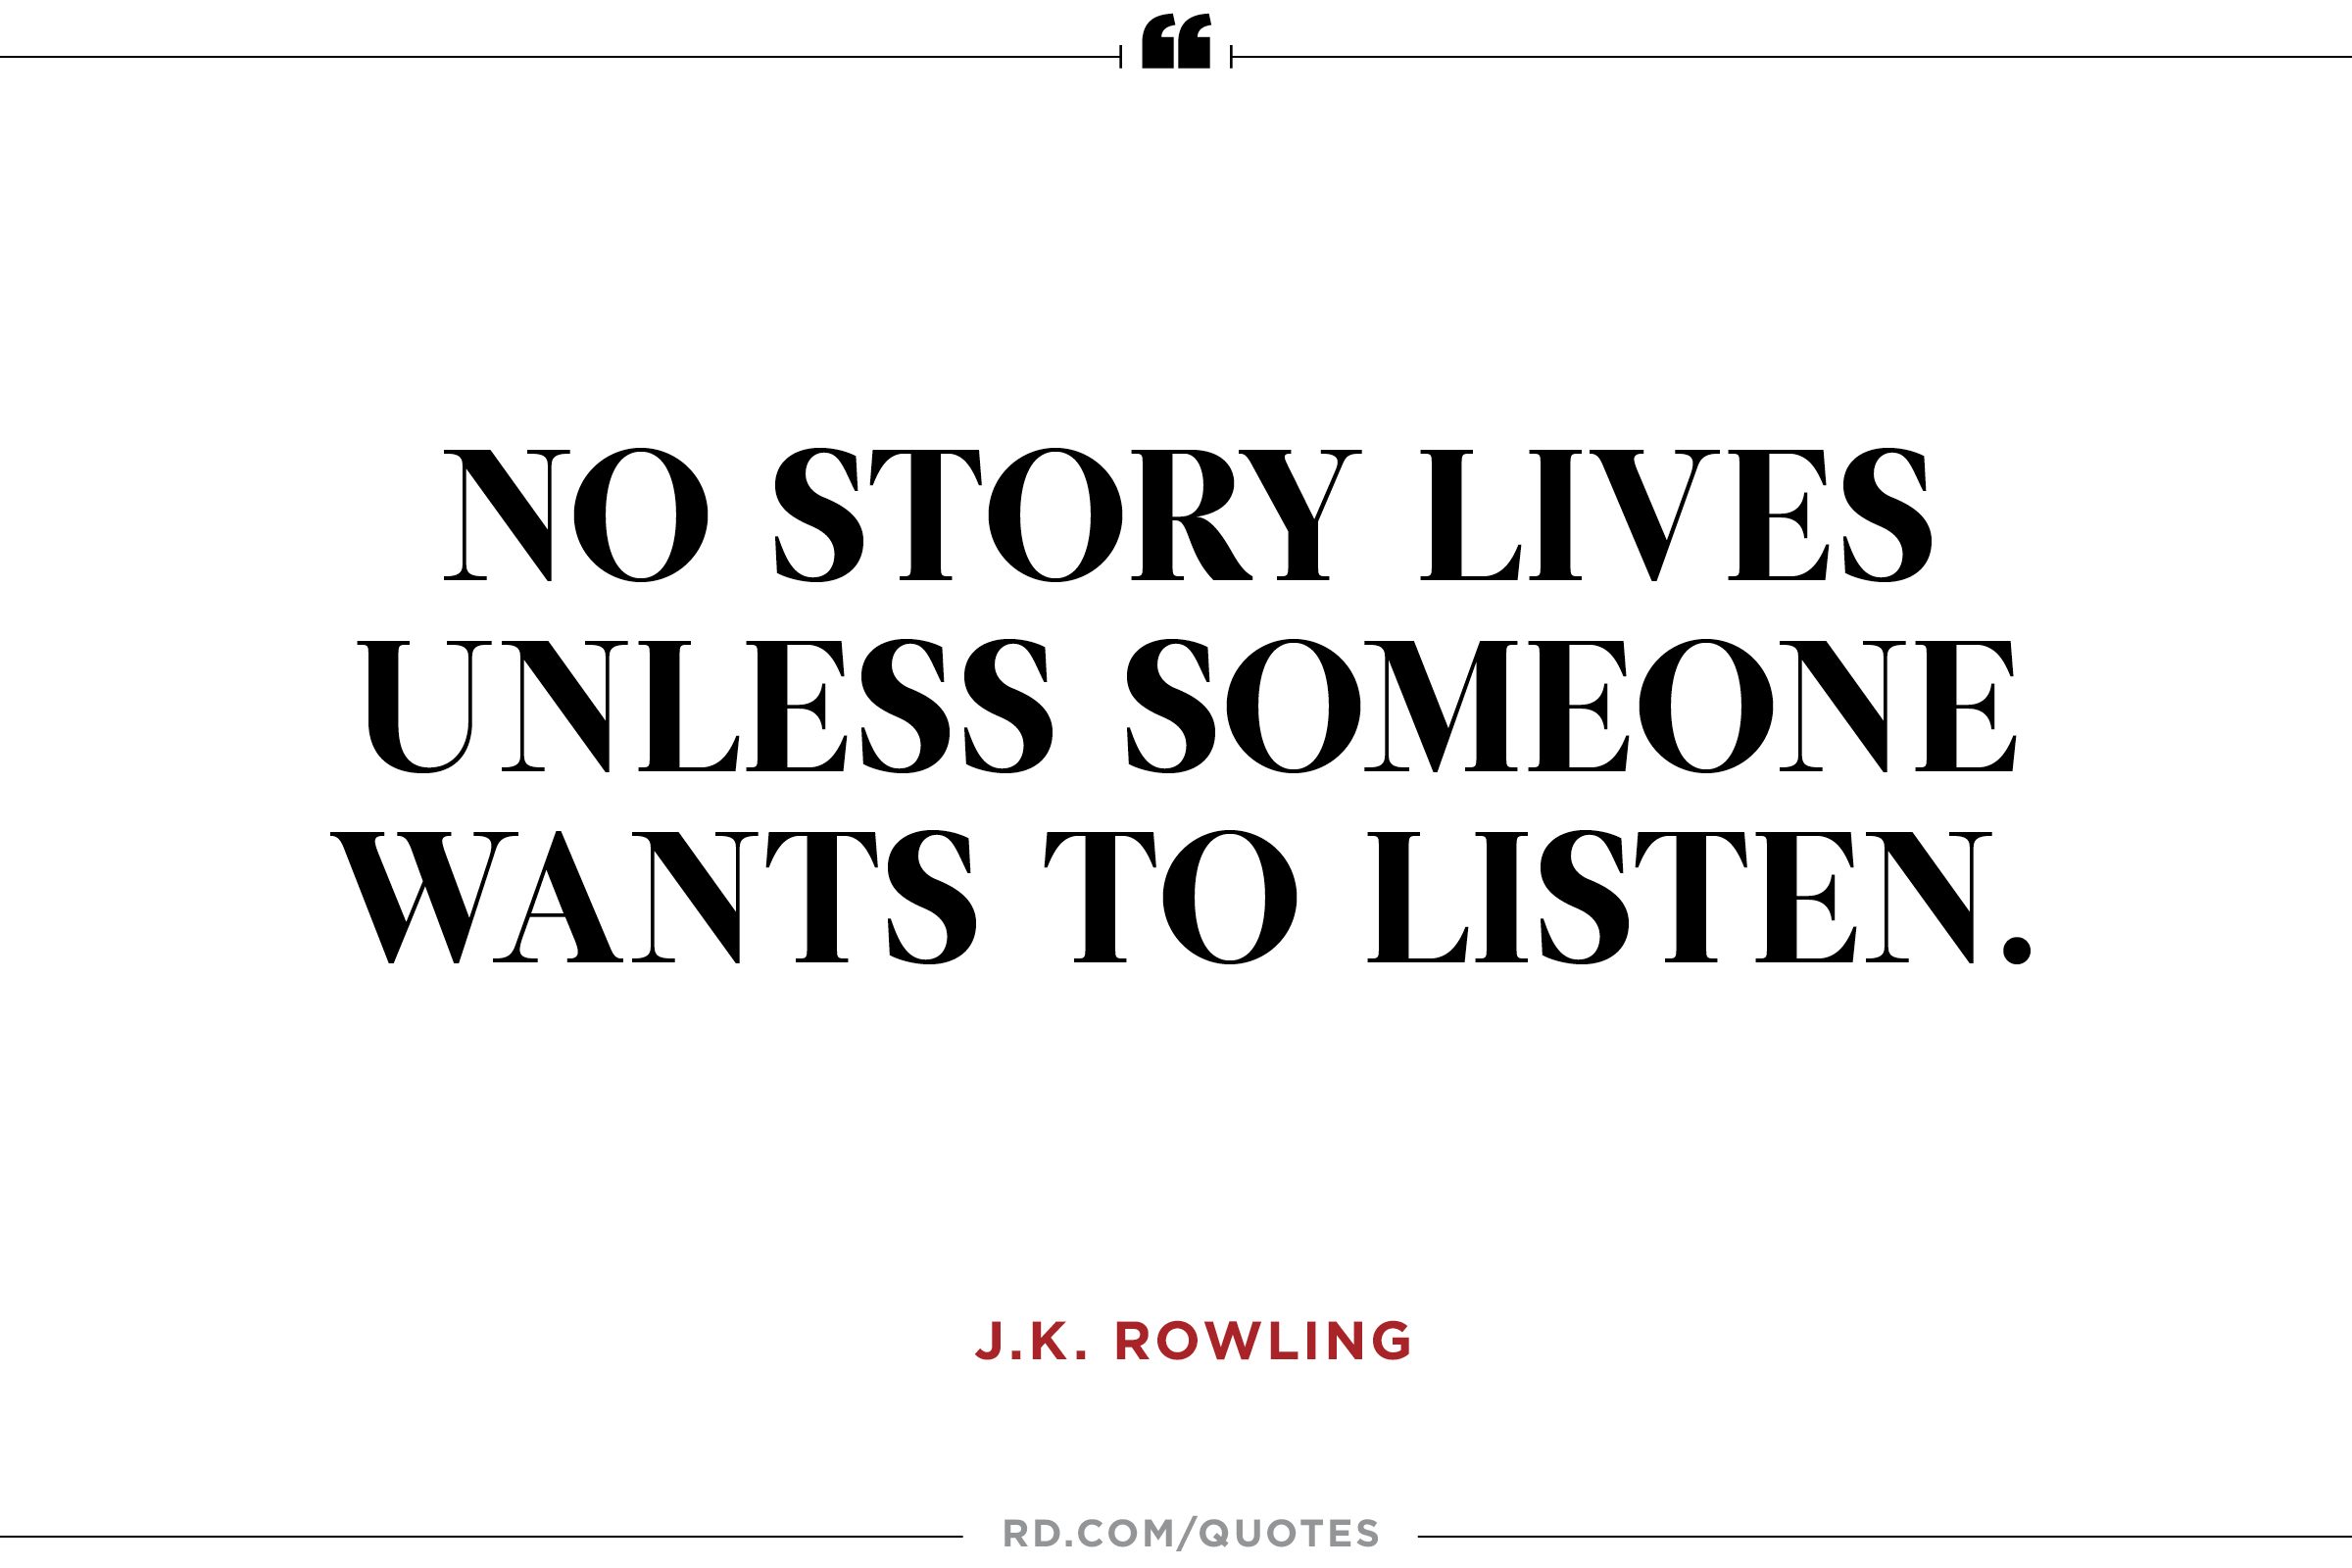 8 J.K. Rowling Quotes to Motivate You Through Any Slump | Reader's Digest